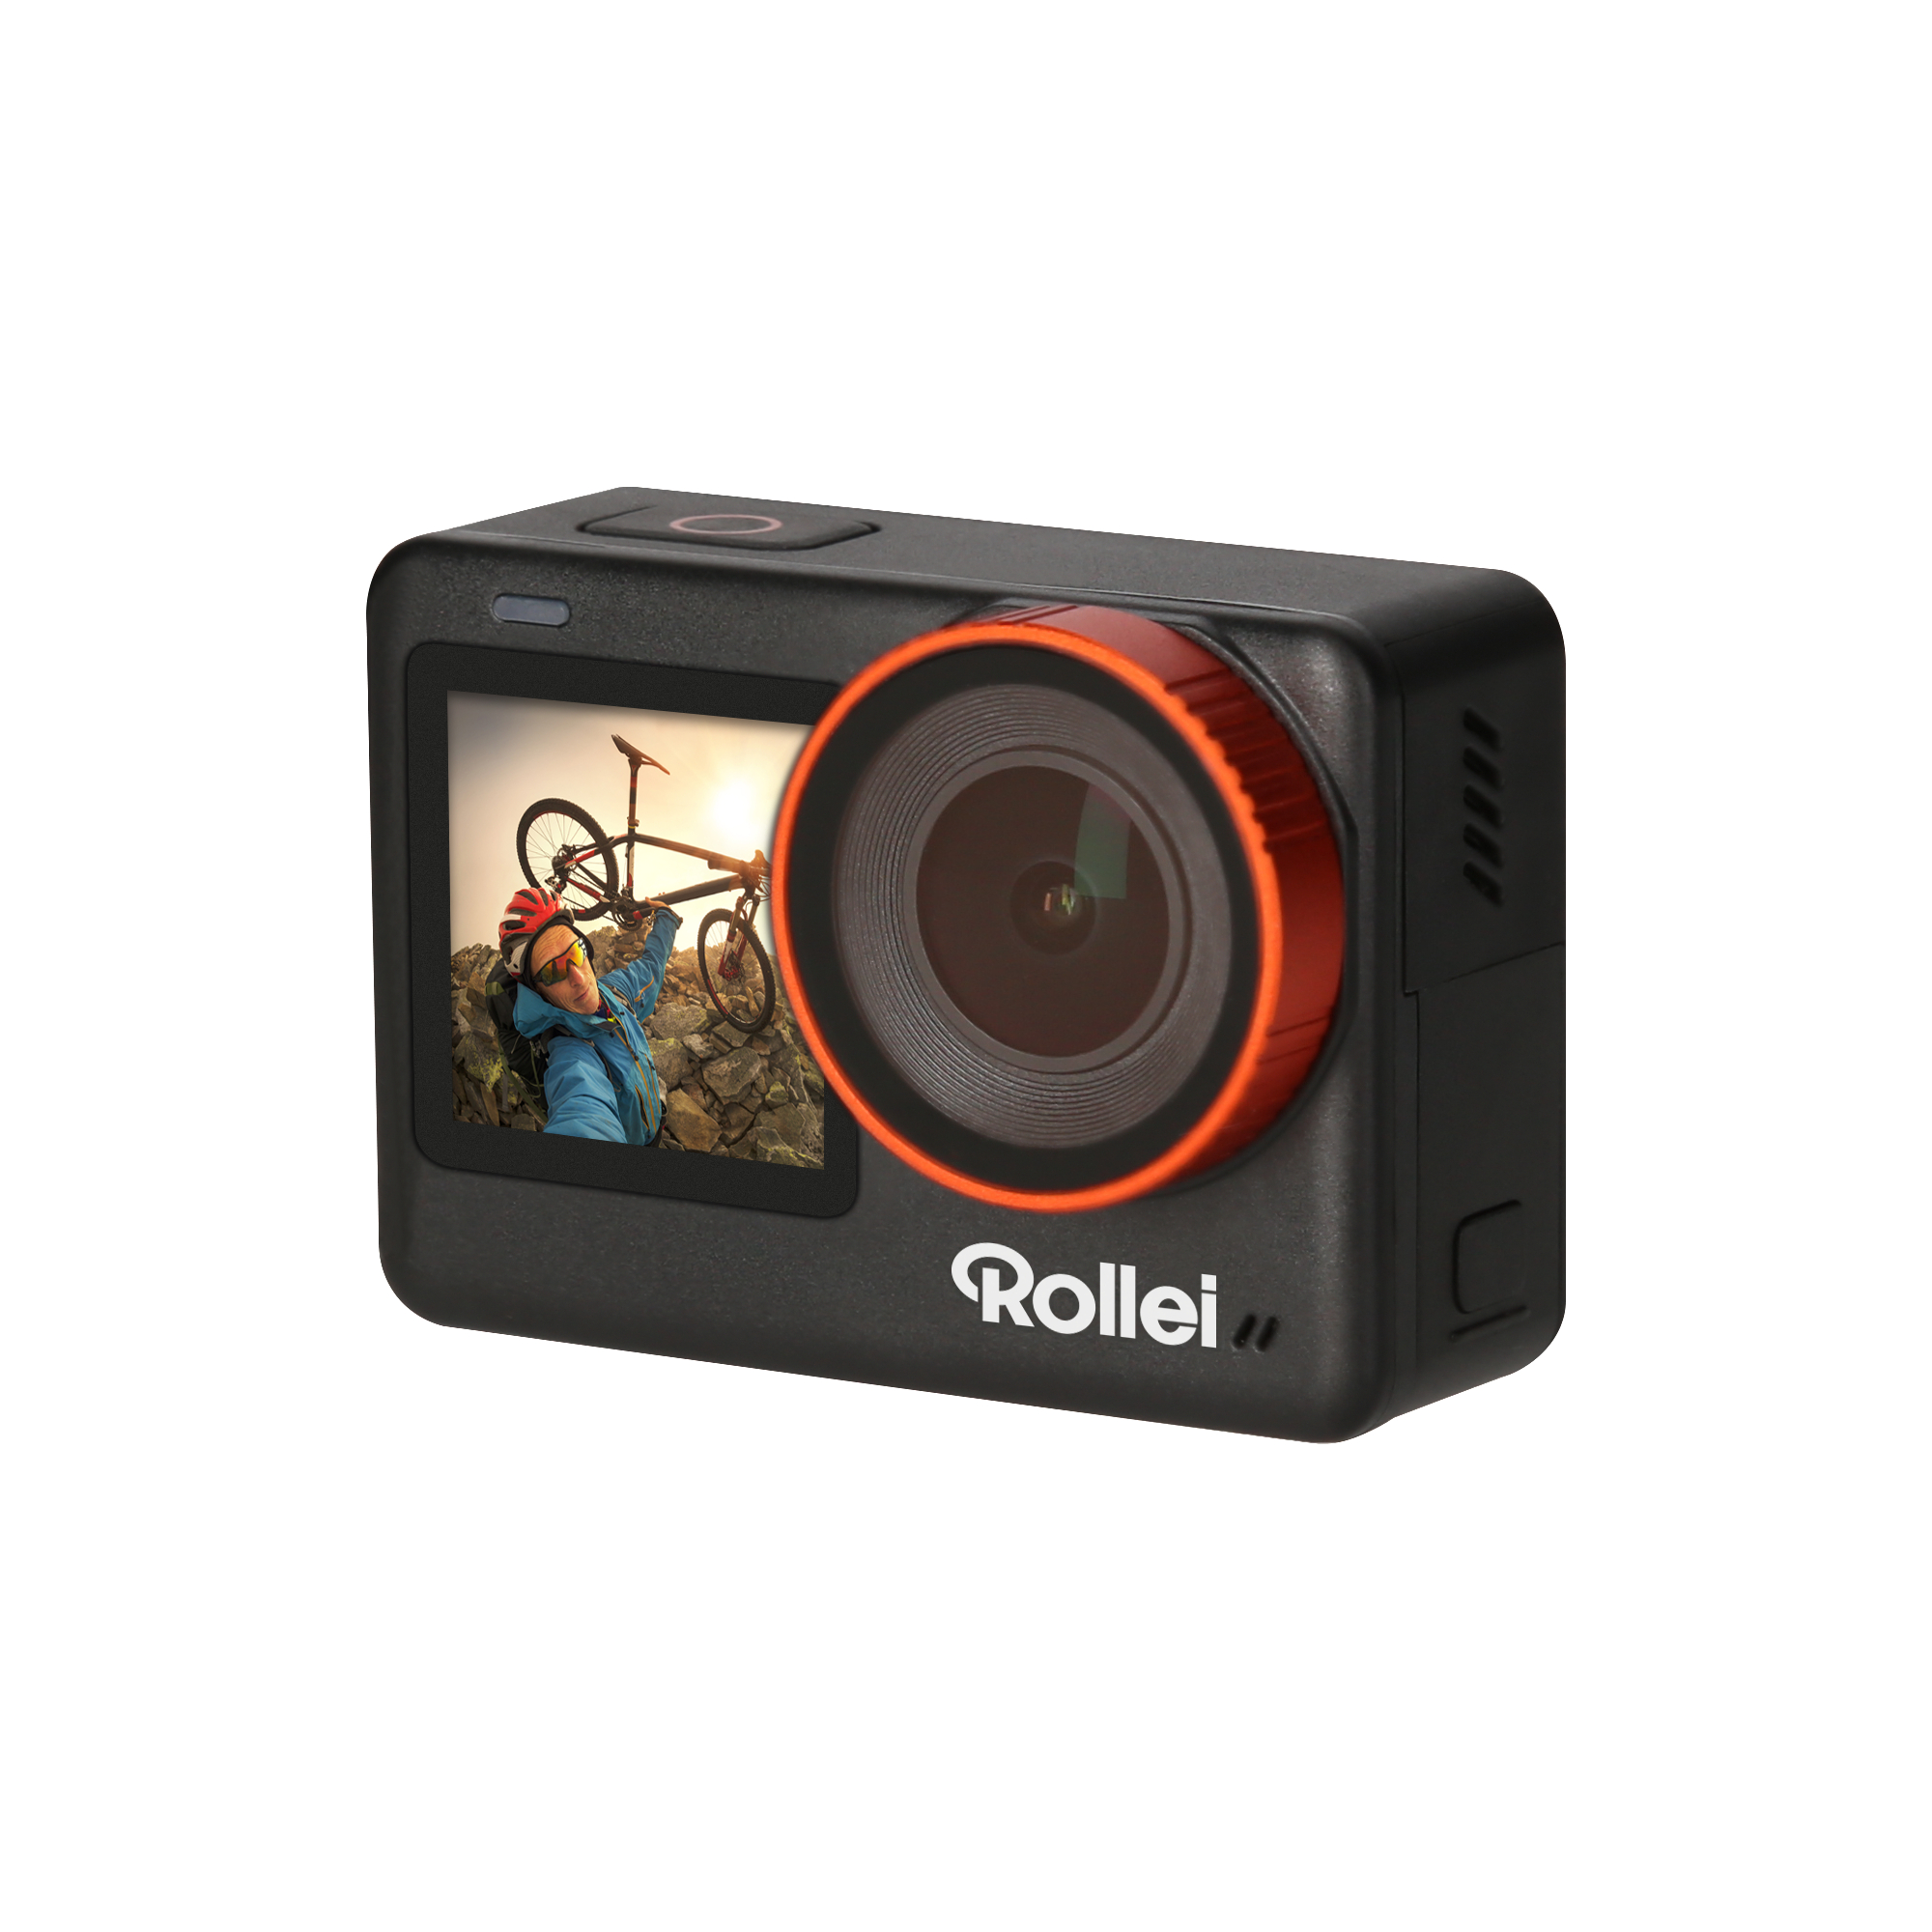 one , Touchscreen Actioncam Actioncam ROLLEI